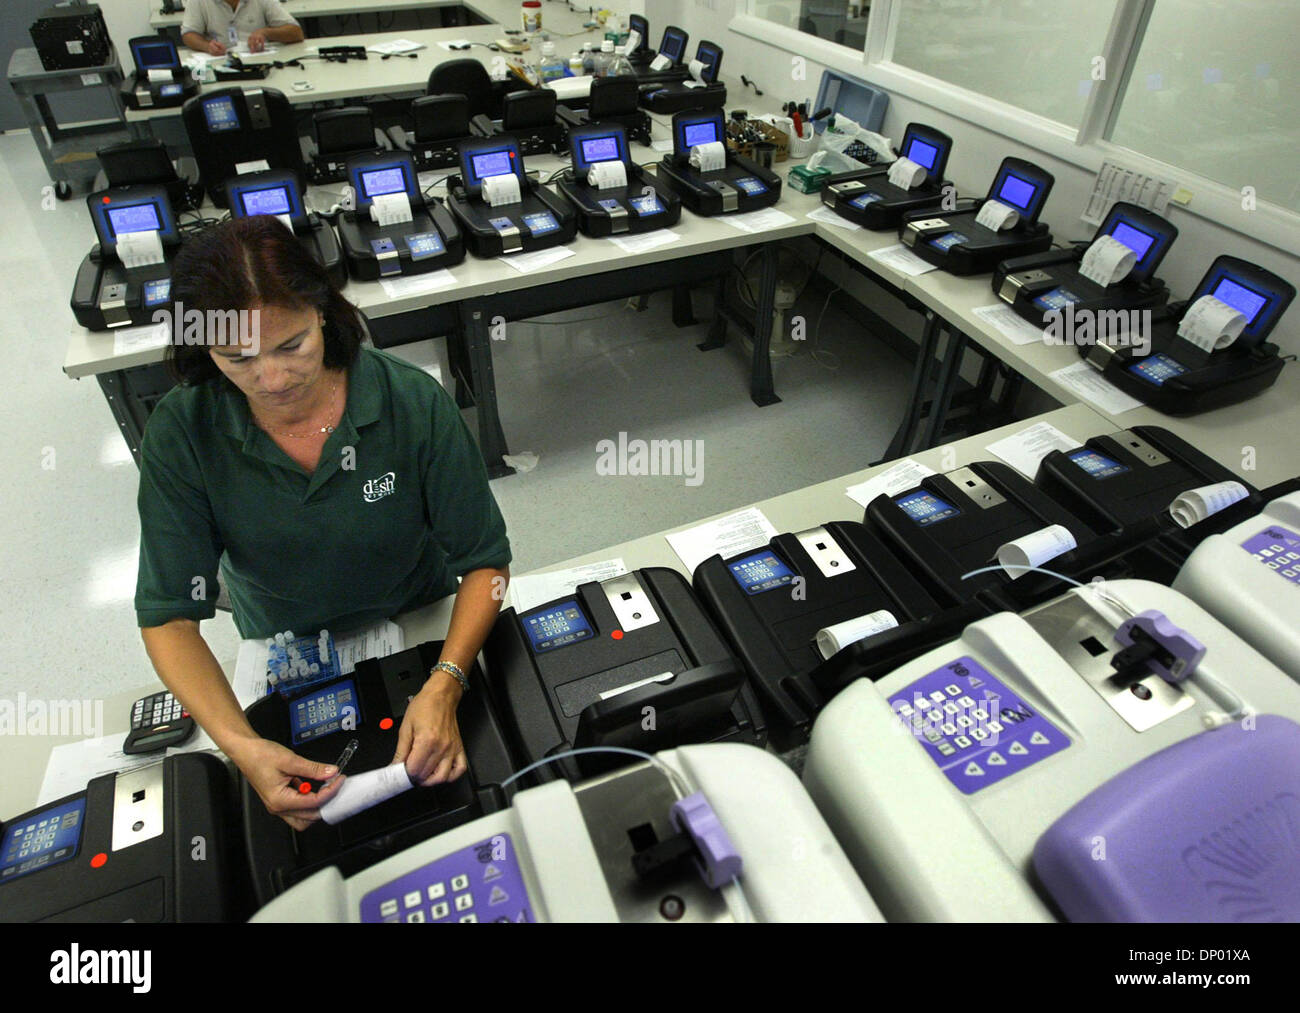 Feb 24, 2006; Palm City, FL, USA; At Awareness Technology, Inc.,  quality control inspector Grace Jurkiewicz checks results of a semi-automatic Biochemistry Analyzer undergoing final testing before shipment to a client.  Similar machines at front right featuring controls and external aesthetics in the color purple are destined for India. Mandatory Credit: Photo by David Spencer/Pal Stock Photo